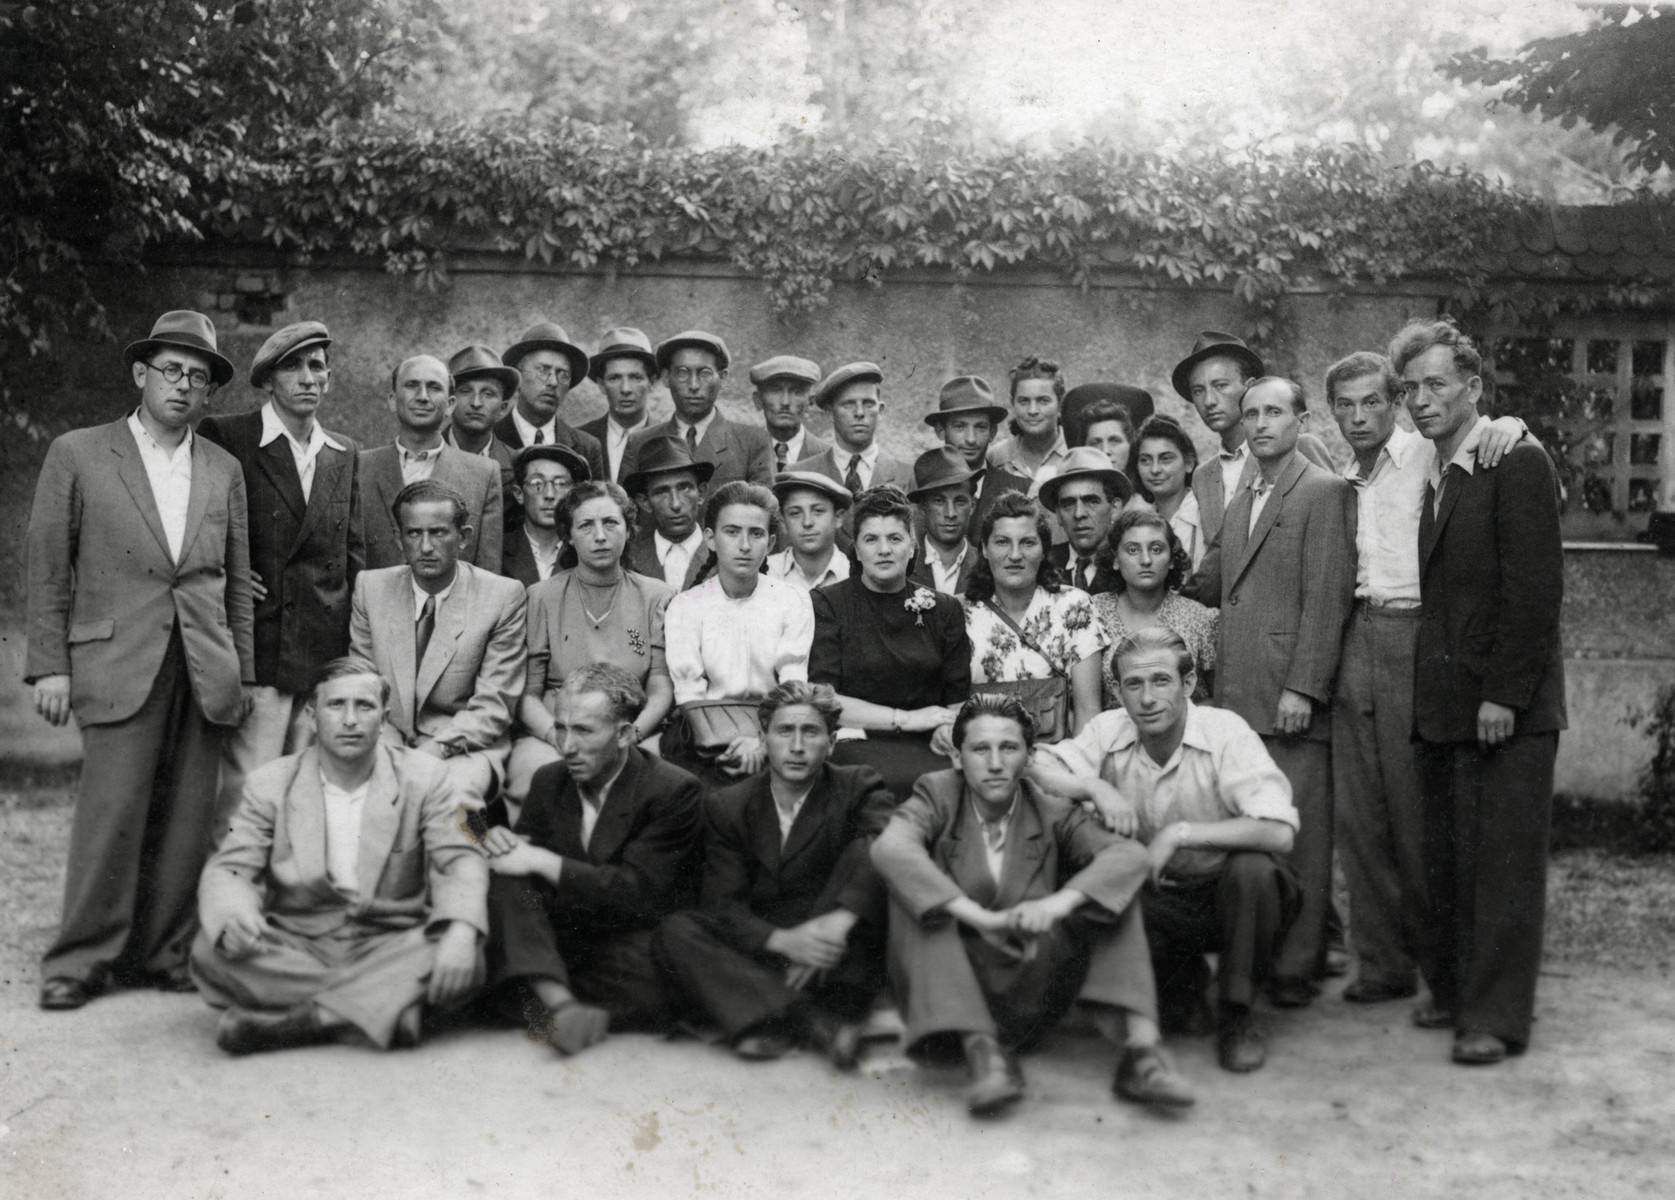 Group portrait of displaced persons in the Eggenfeld DP camp.  

Among those pictured is Zvi Herschel (seated in the back row, second from the right).